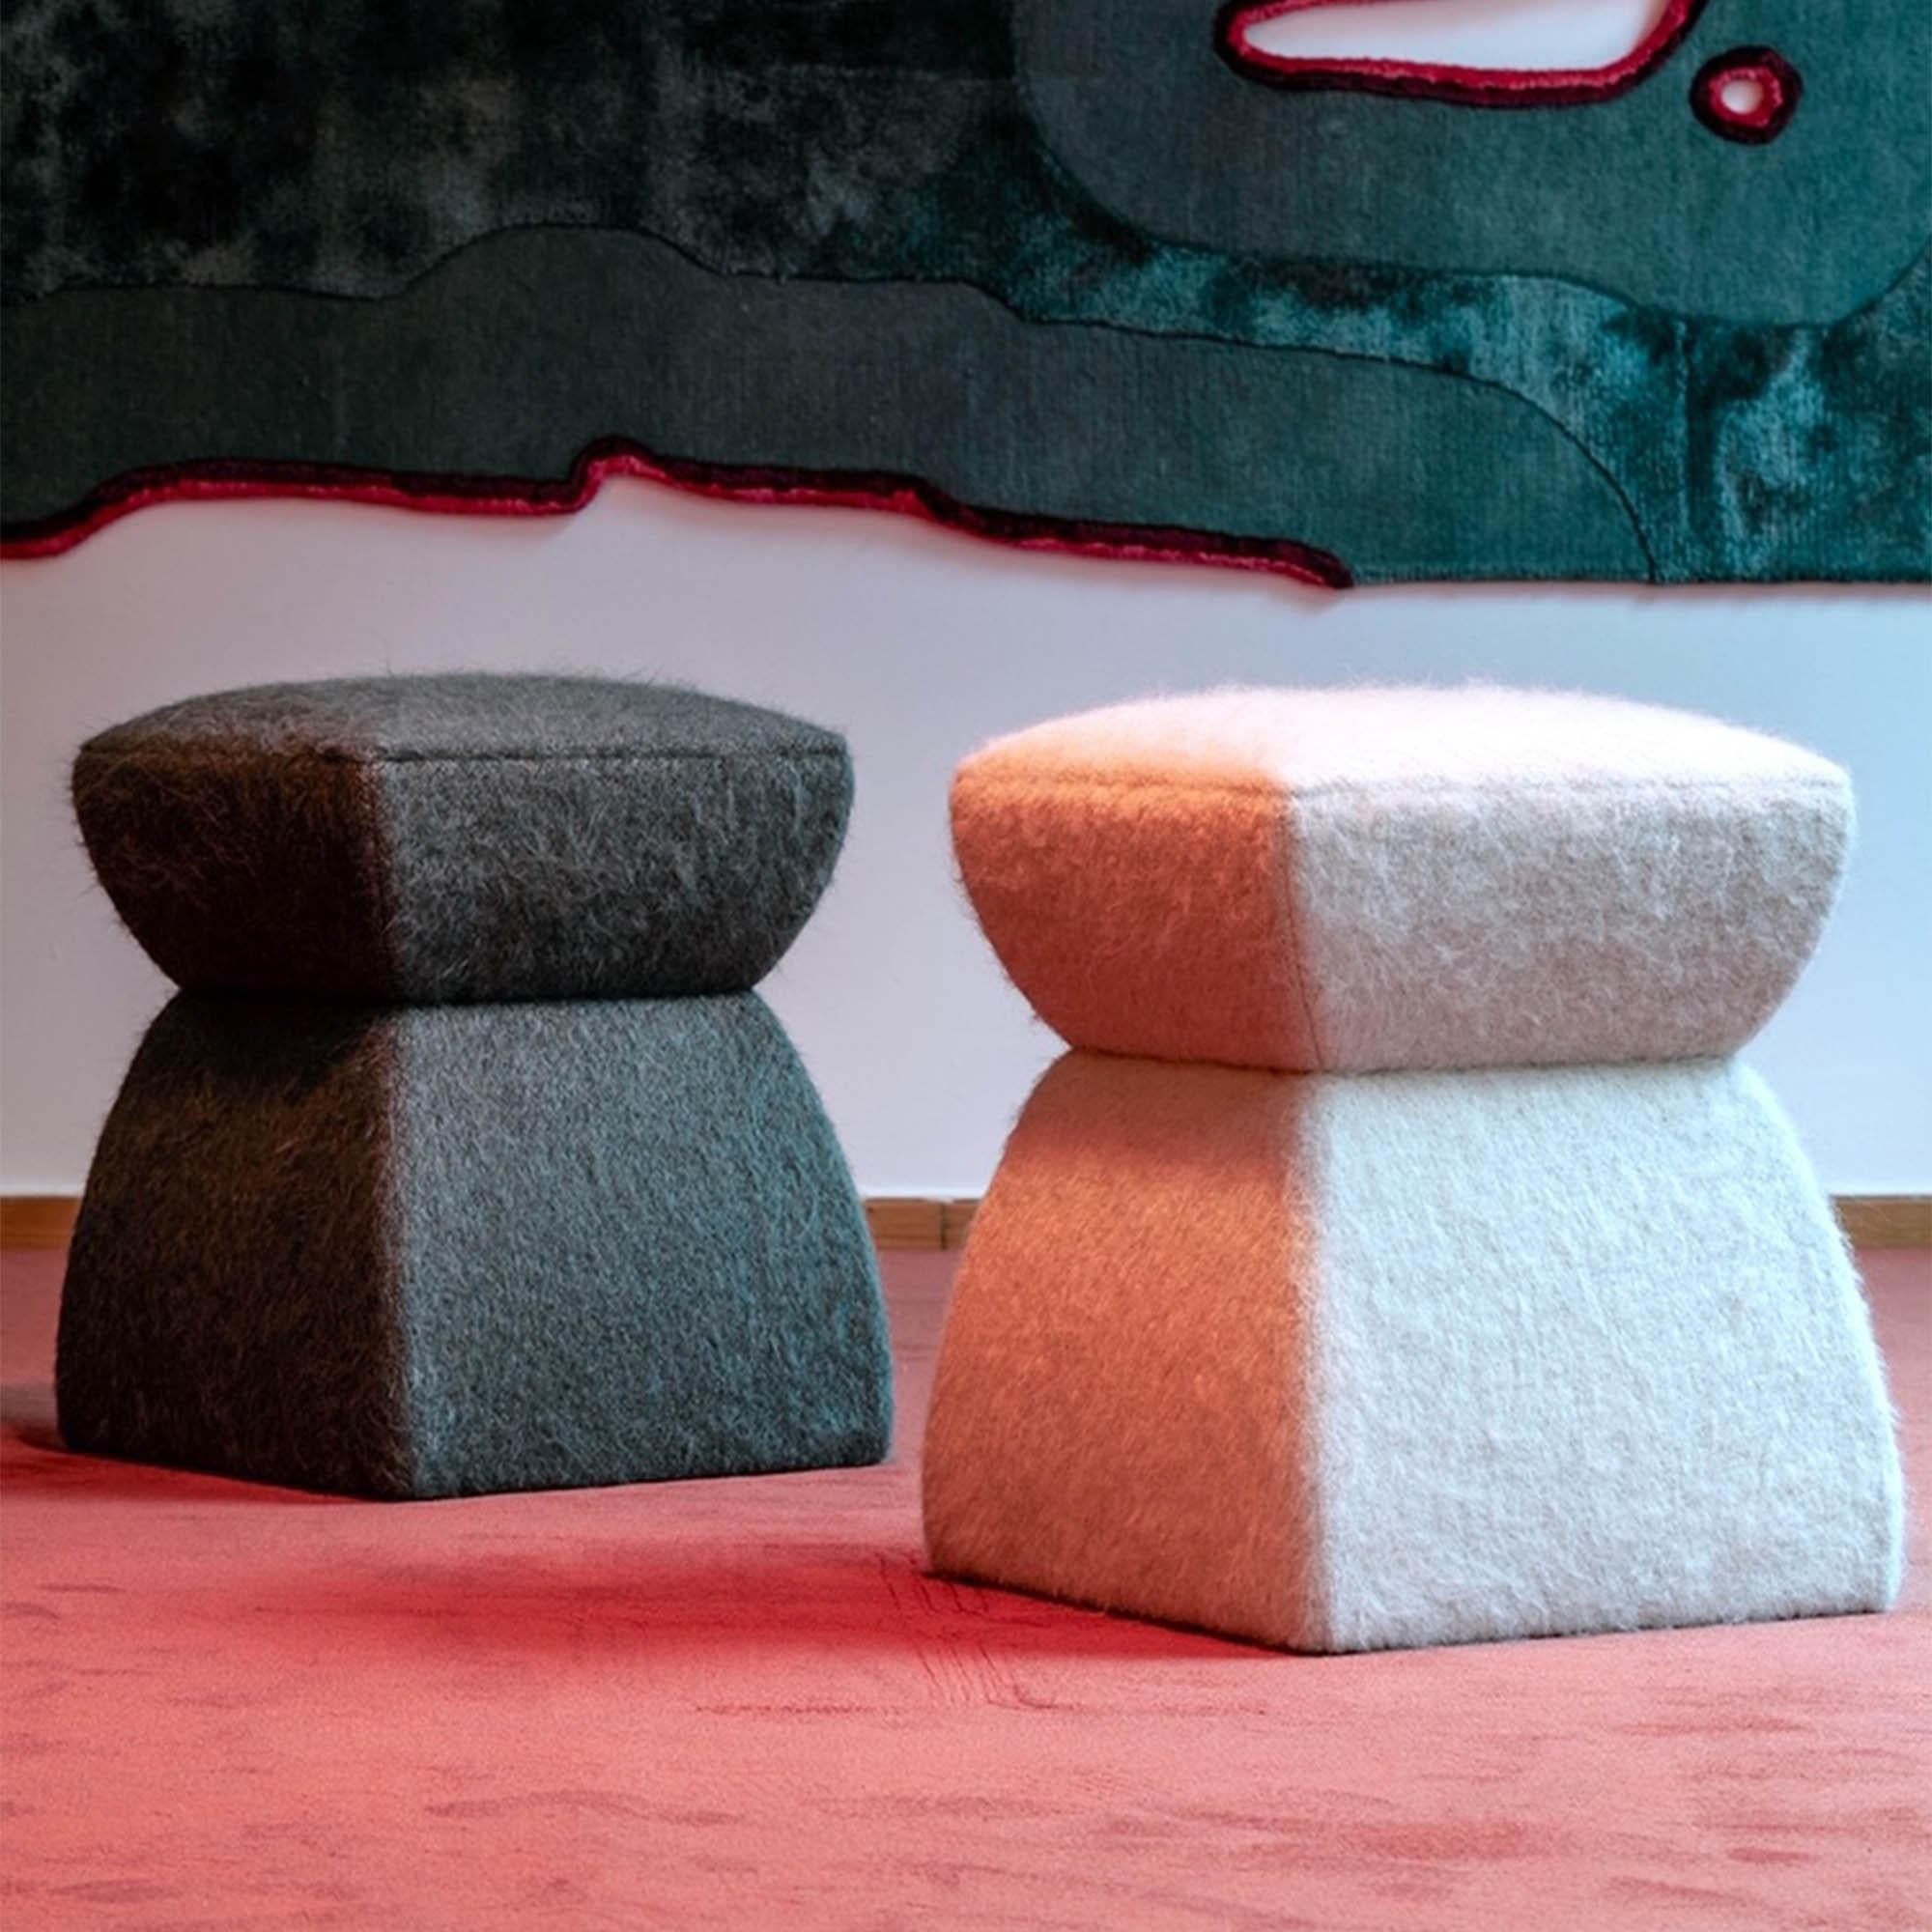 This fun yet Classic pouf is indeed a celebration of the Romanian sculptor Constantin Brâncusi’s contribution to modernism, referencing one of his most celebrated work, Infinite Column. High-grade plain weaves of wool, mohair and long-haired alpaca